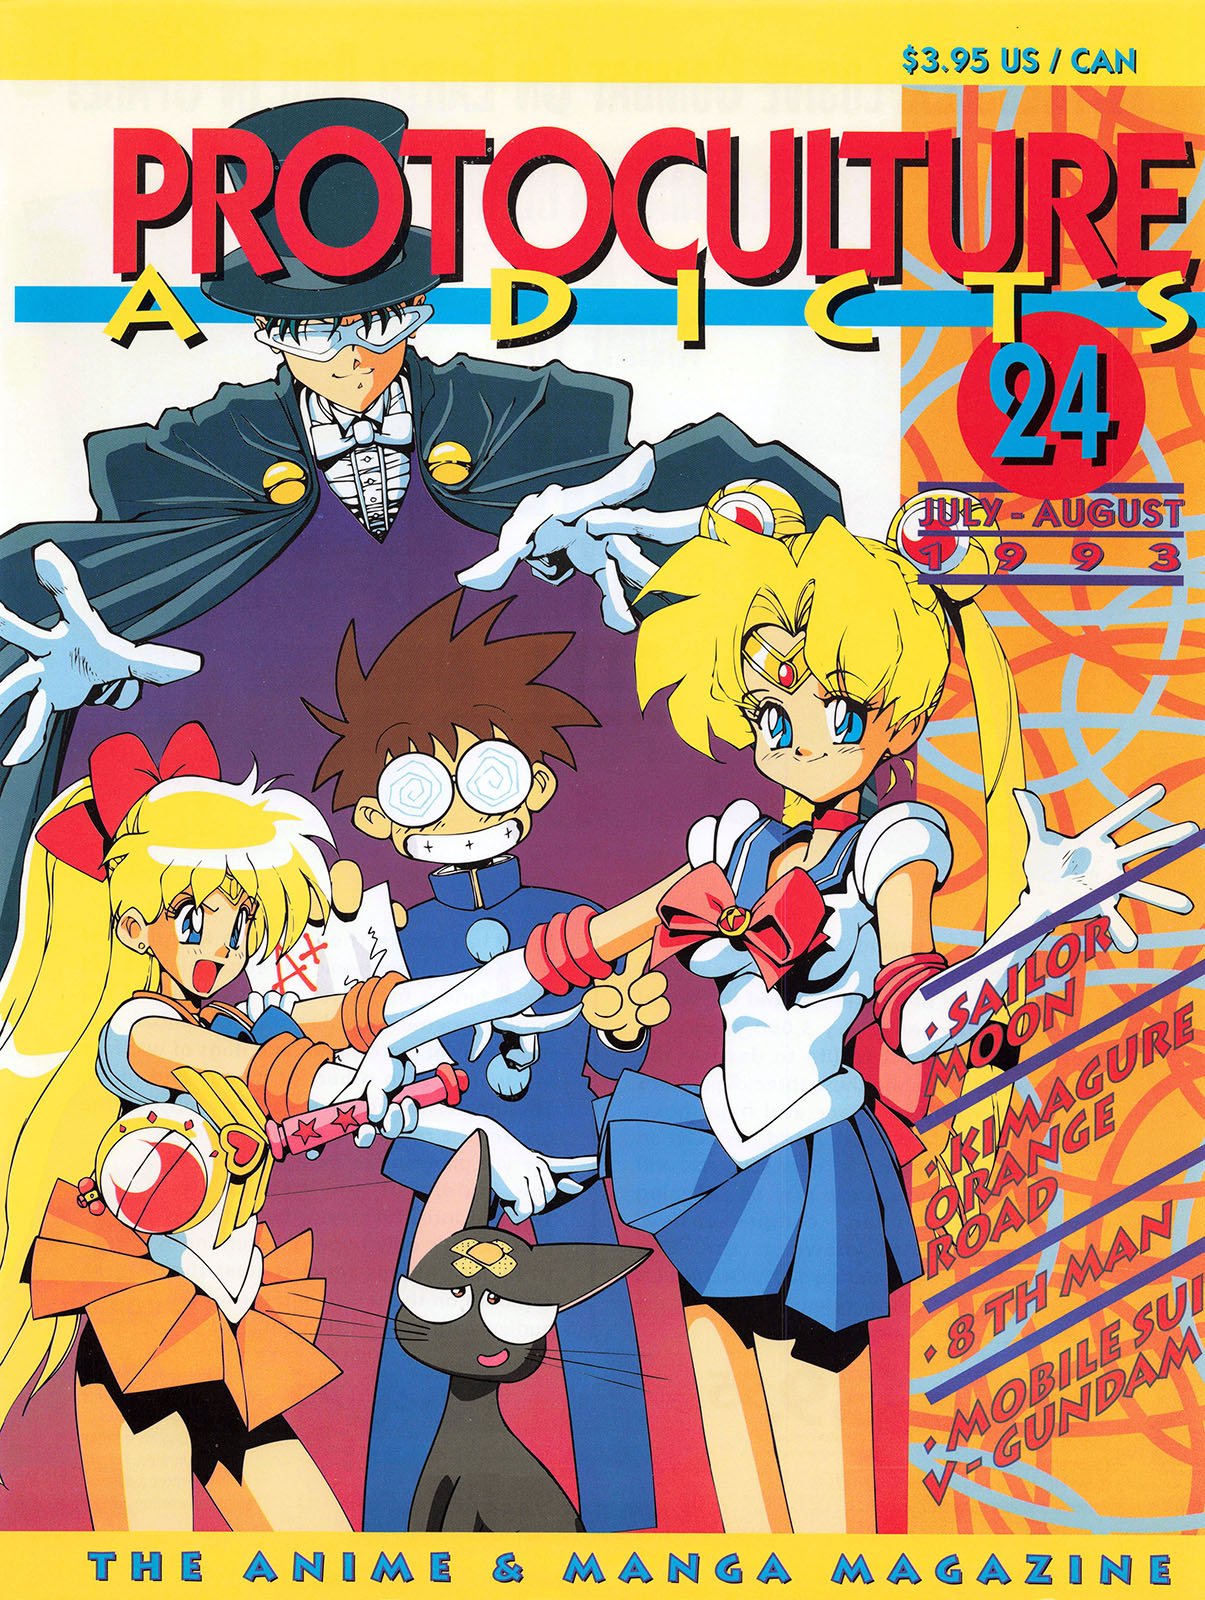 More information about "Protoculture Addicts 024 (July-August 1993)"